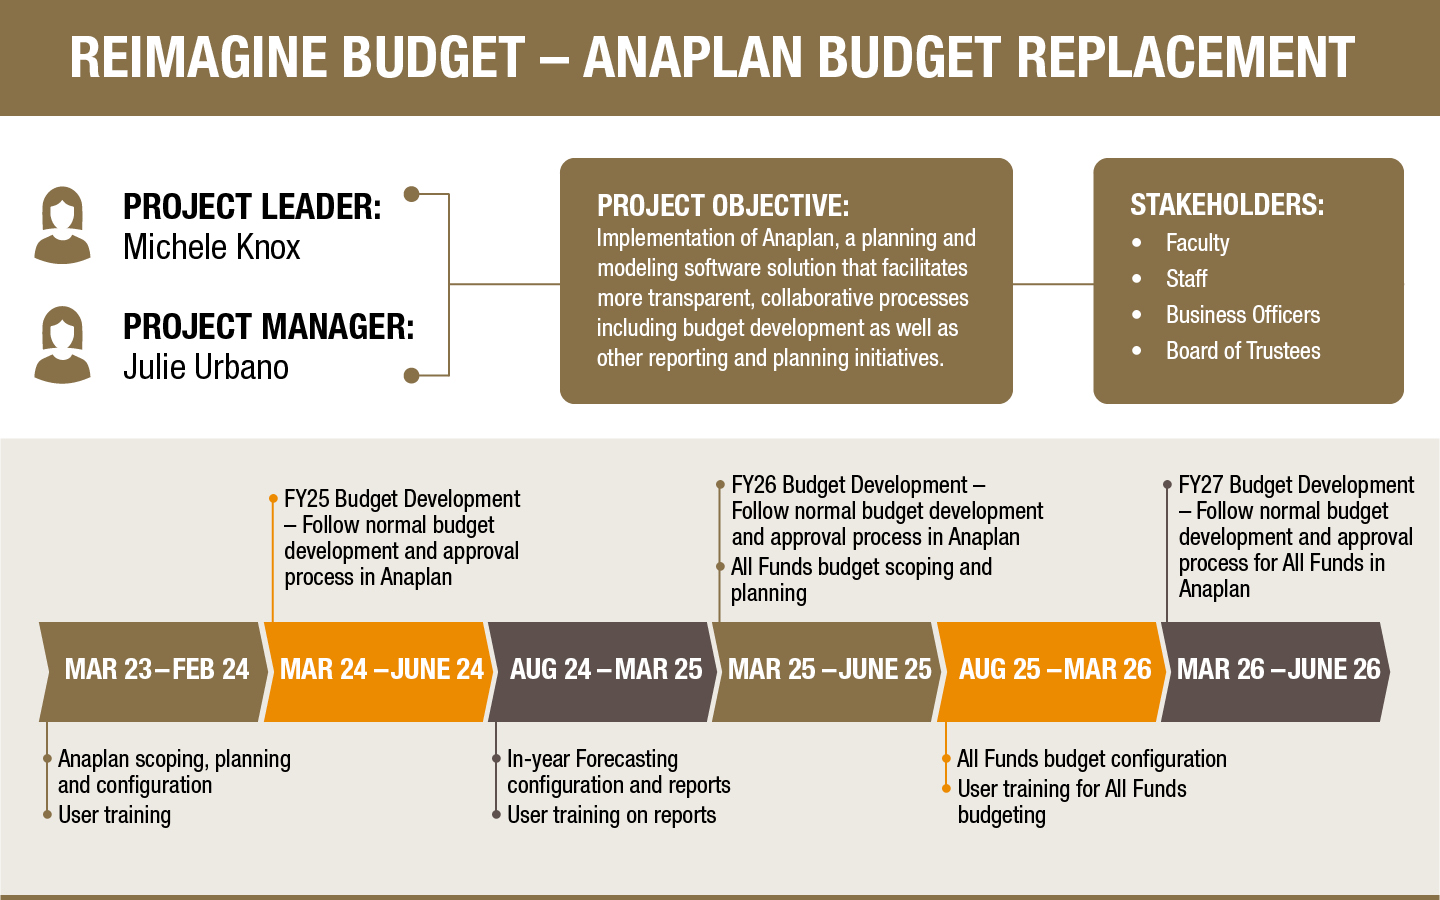 Anaplan Budget Replacement graphic. The content in the infographic is explained in text beneath the image.